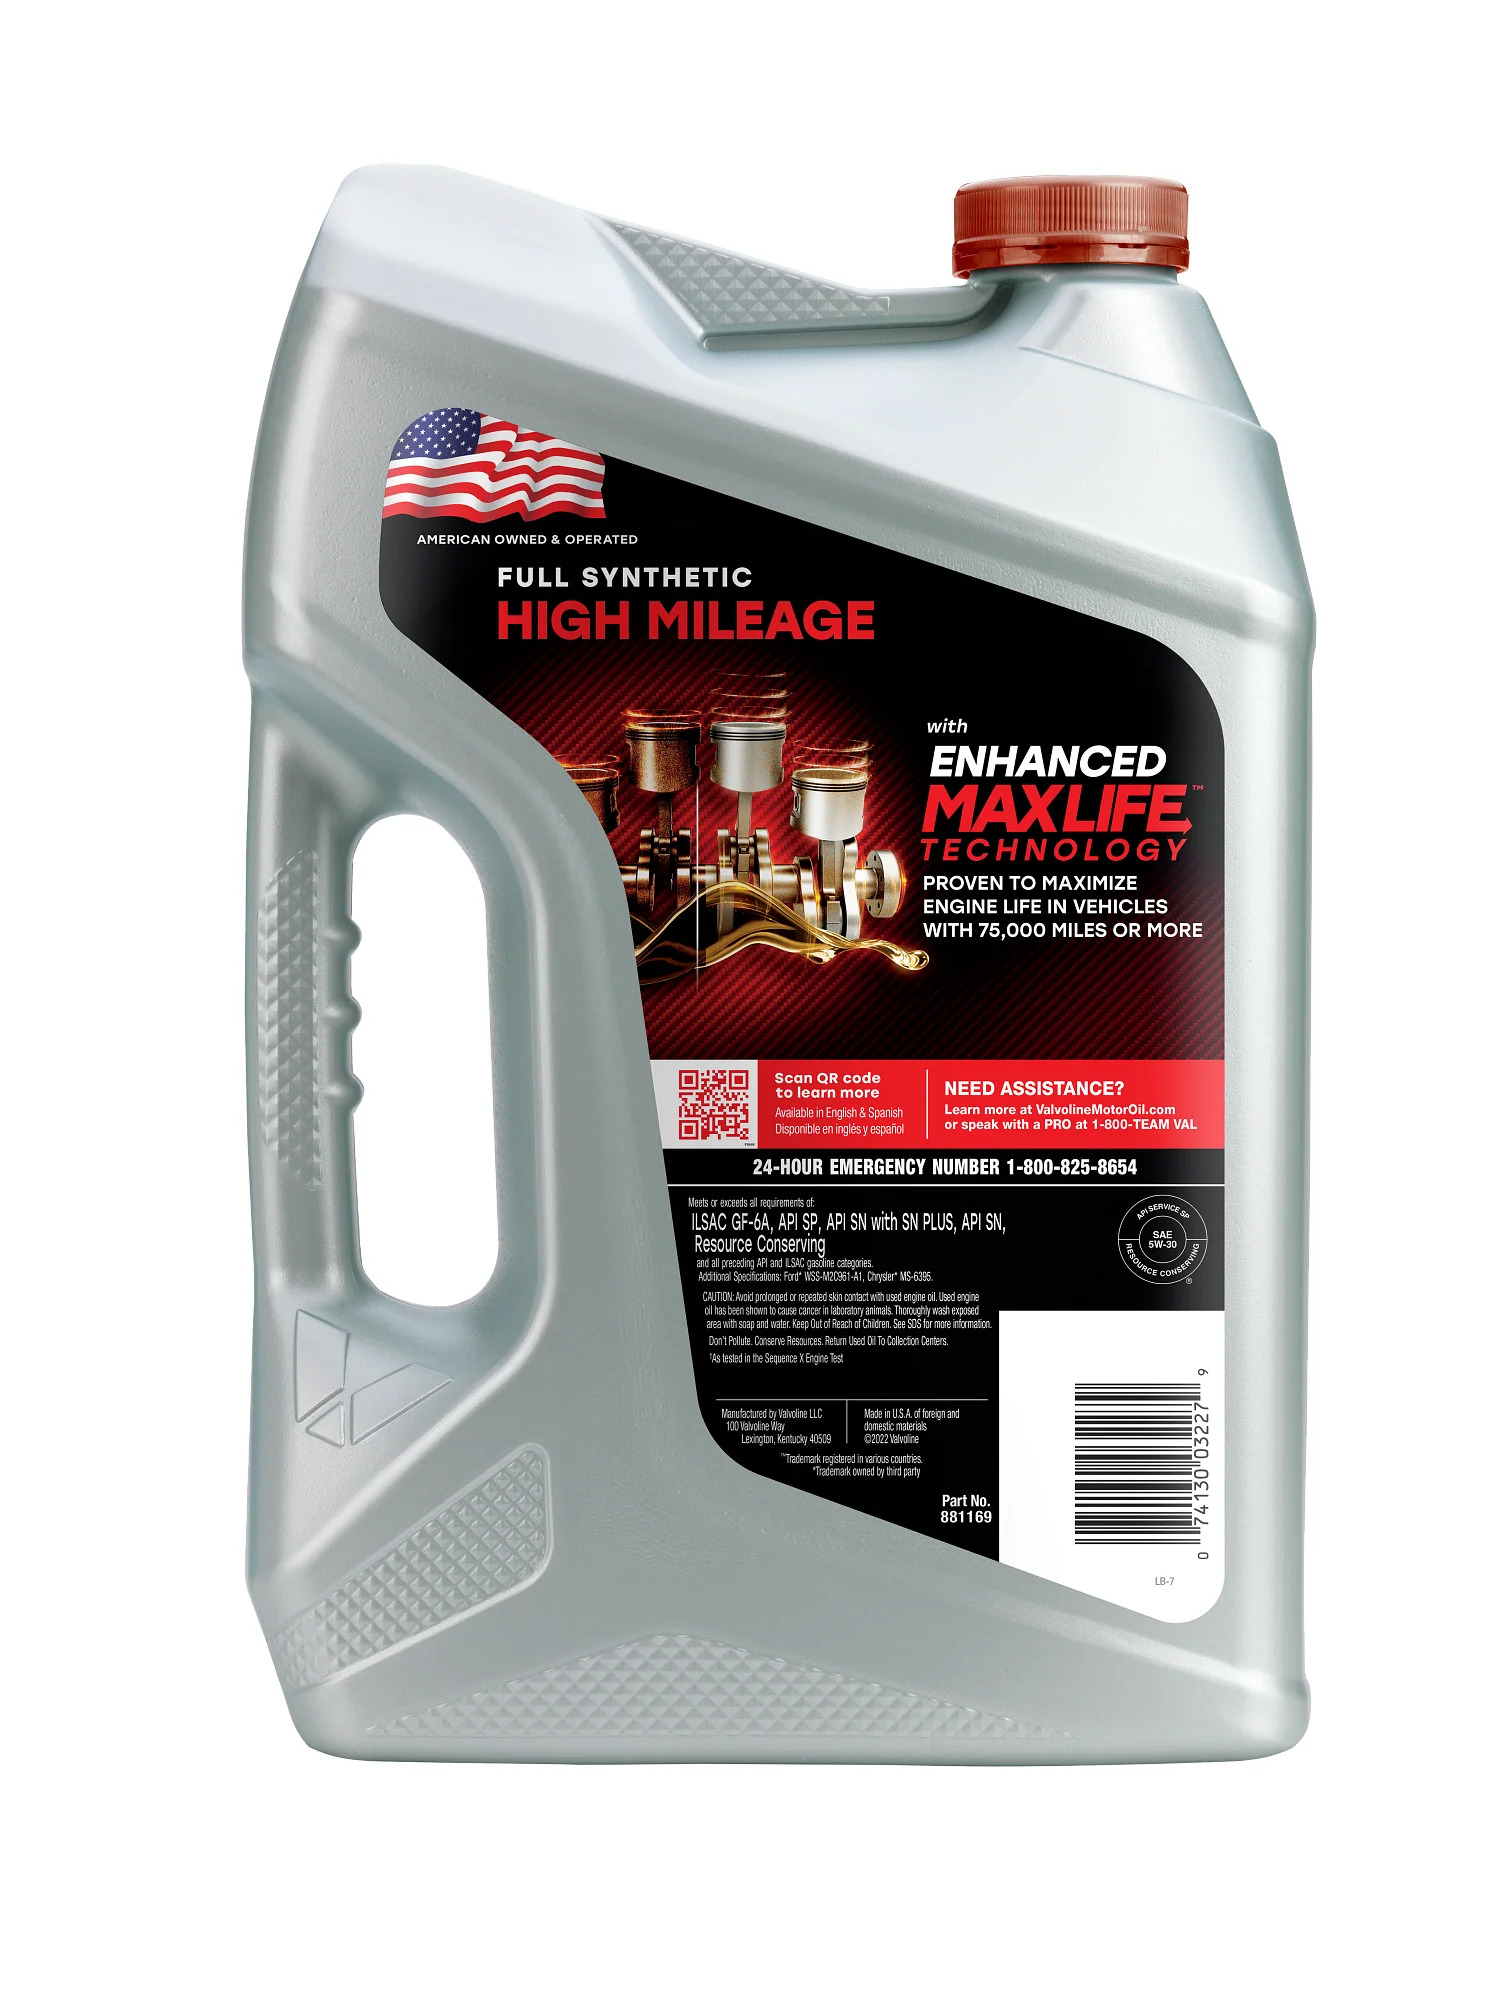 Valvoline Full Synthetic High Mileage with MaxLife Technology Motor Oil SAE 5W-30 - image 3 of 12